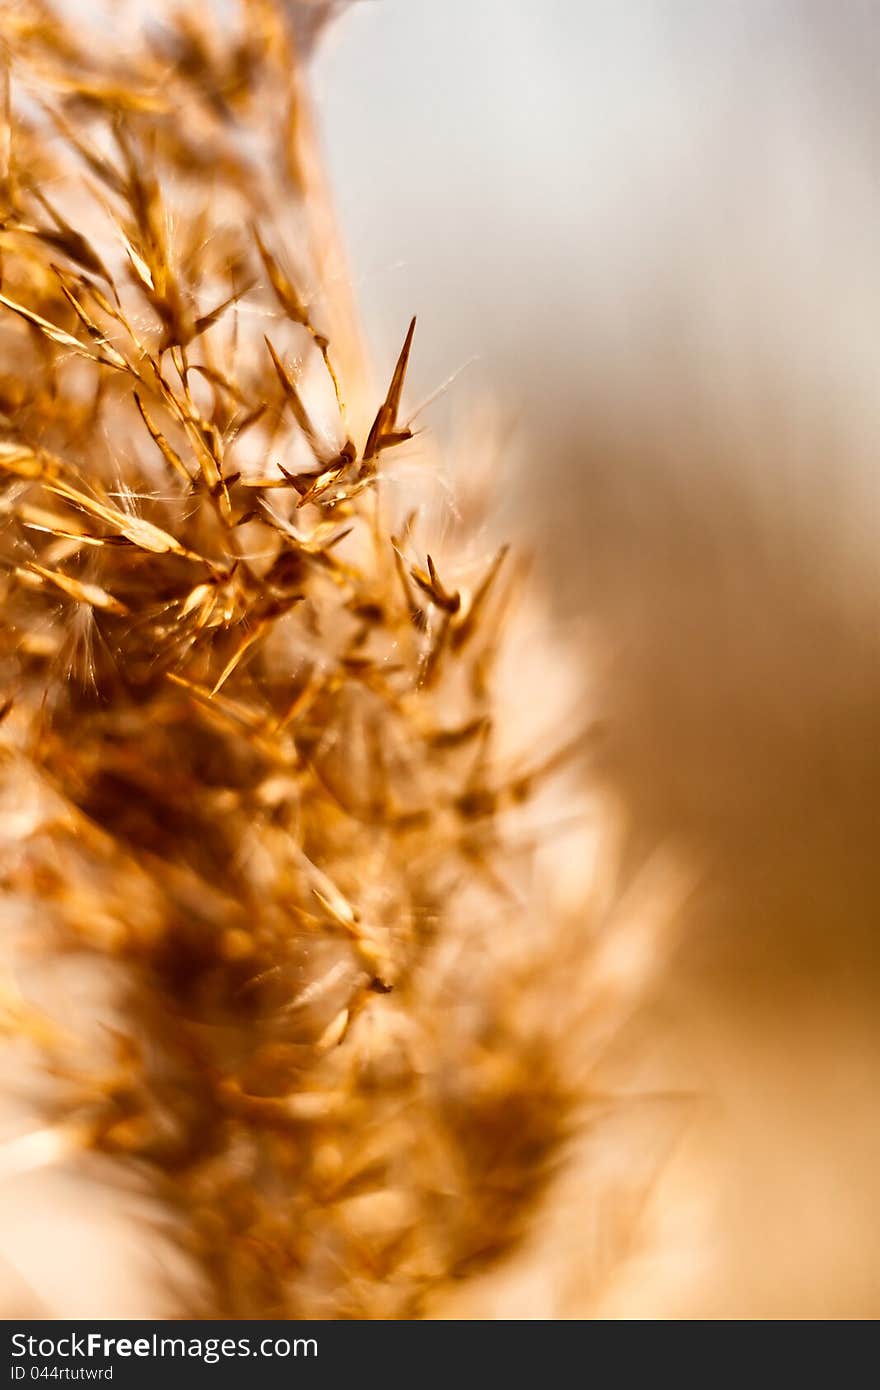 Dried reed in the winter with smoothed background